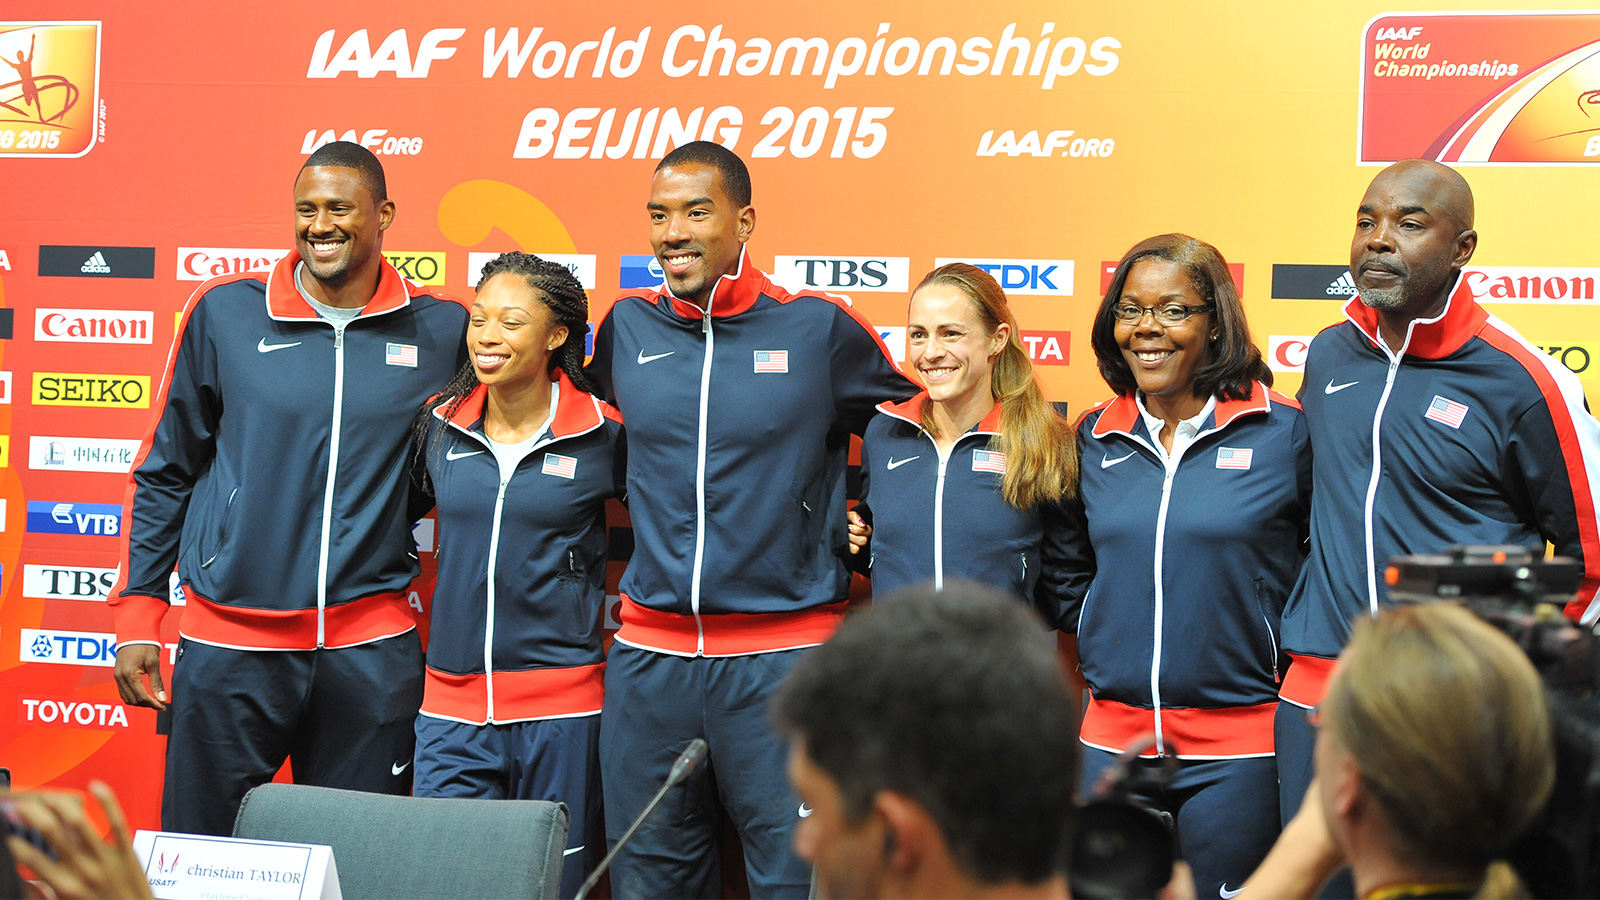 Floréal’s Team USA Wins the Most Medals at World Championships